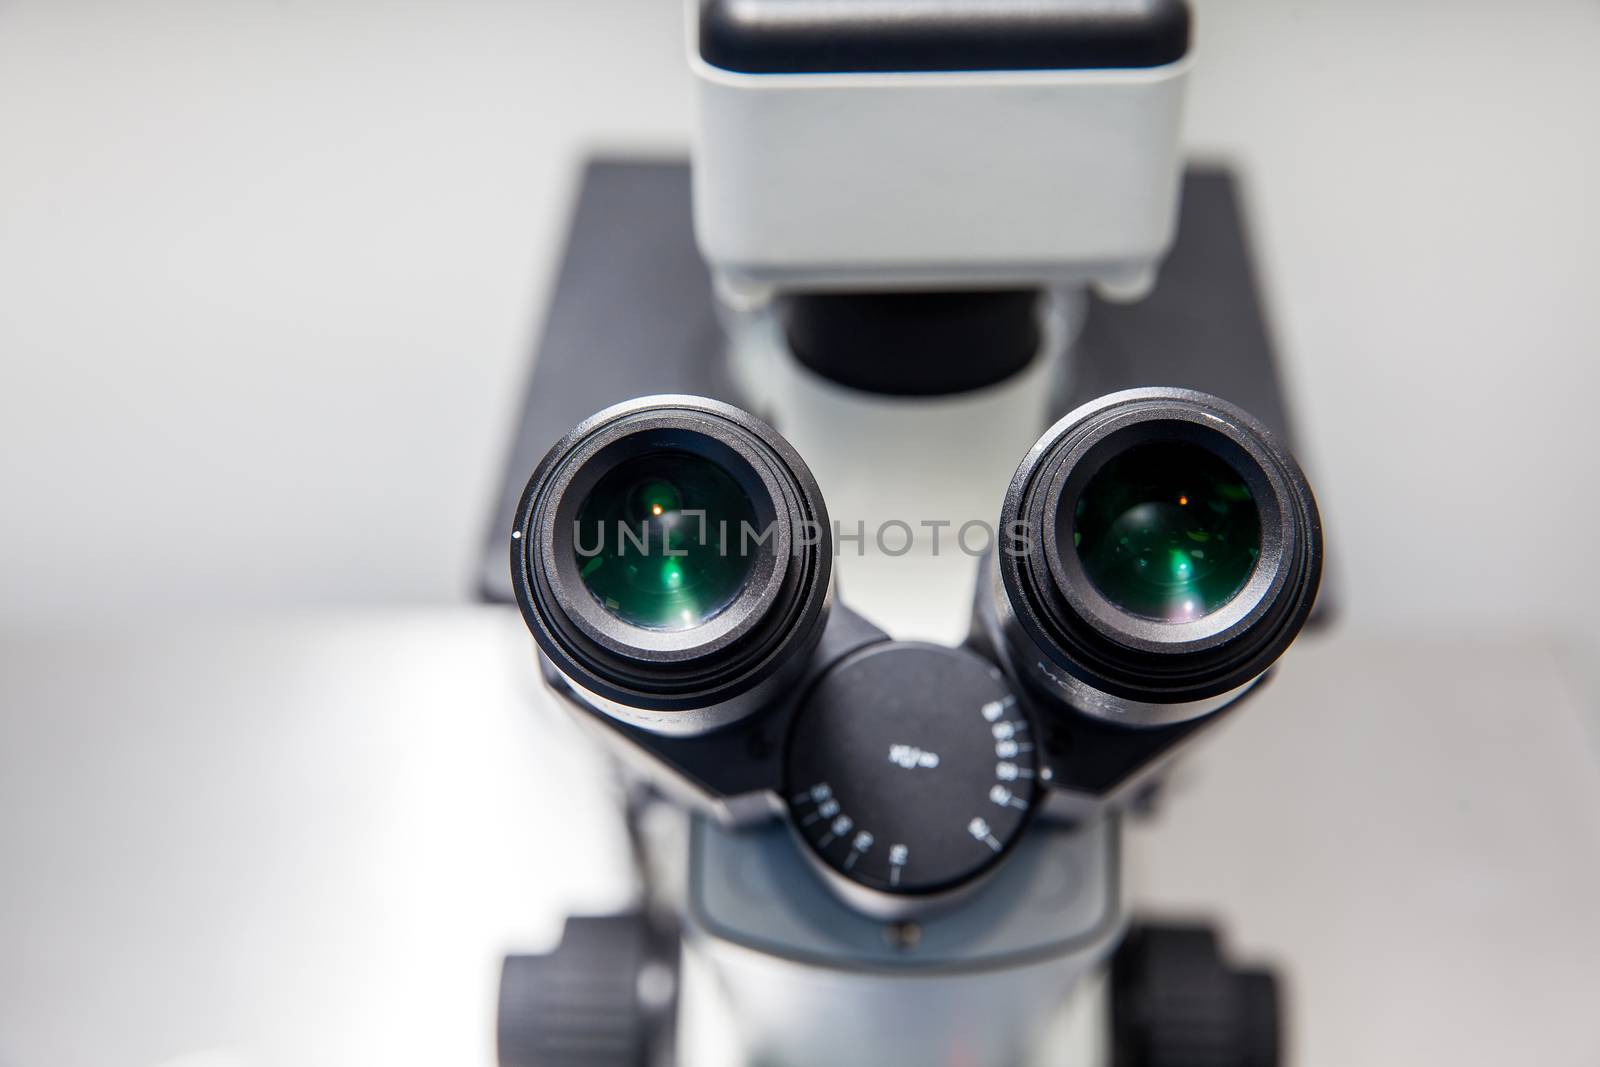 Close up of stereo microscope eyepieces in the laboratory